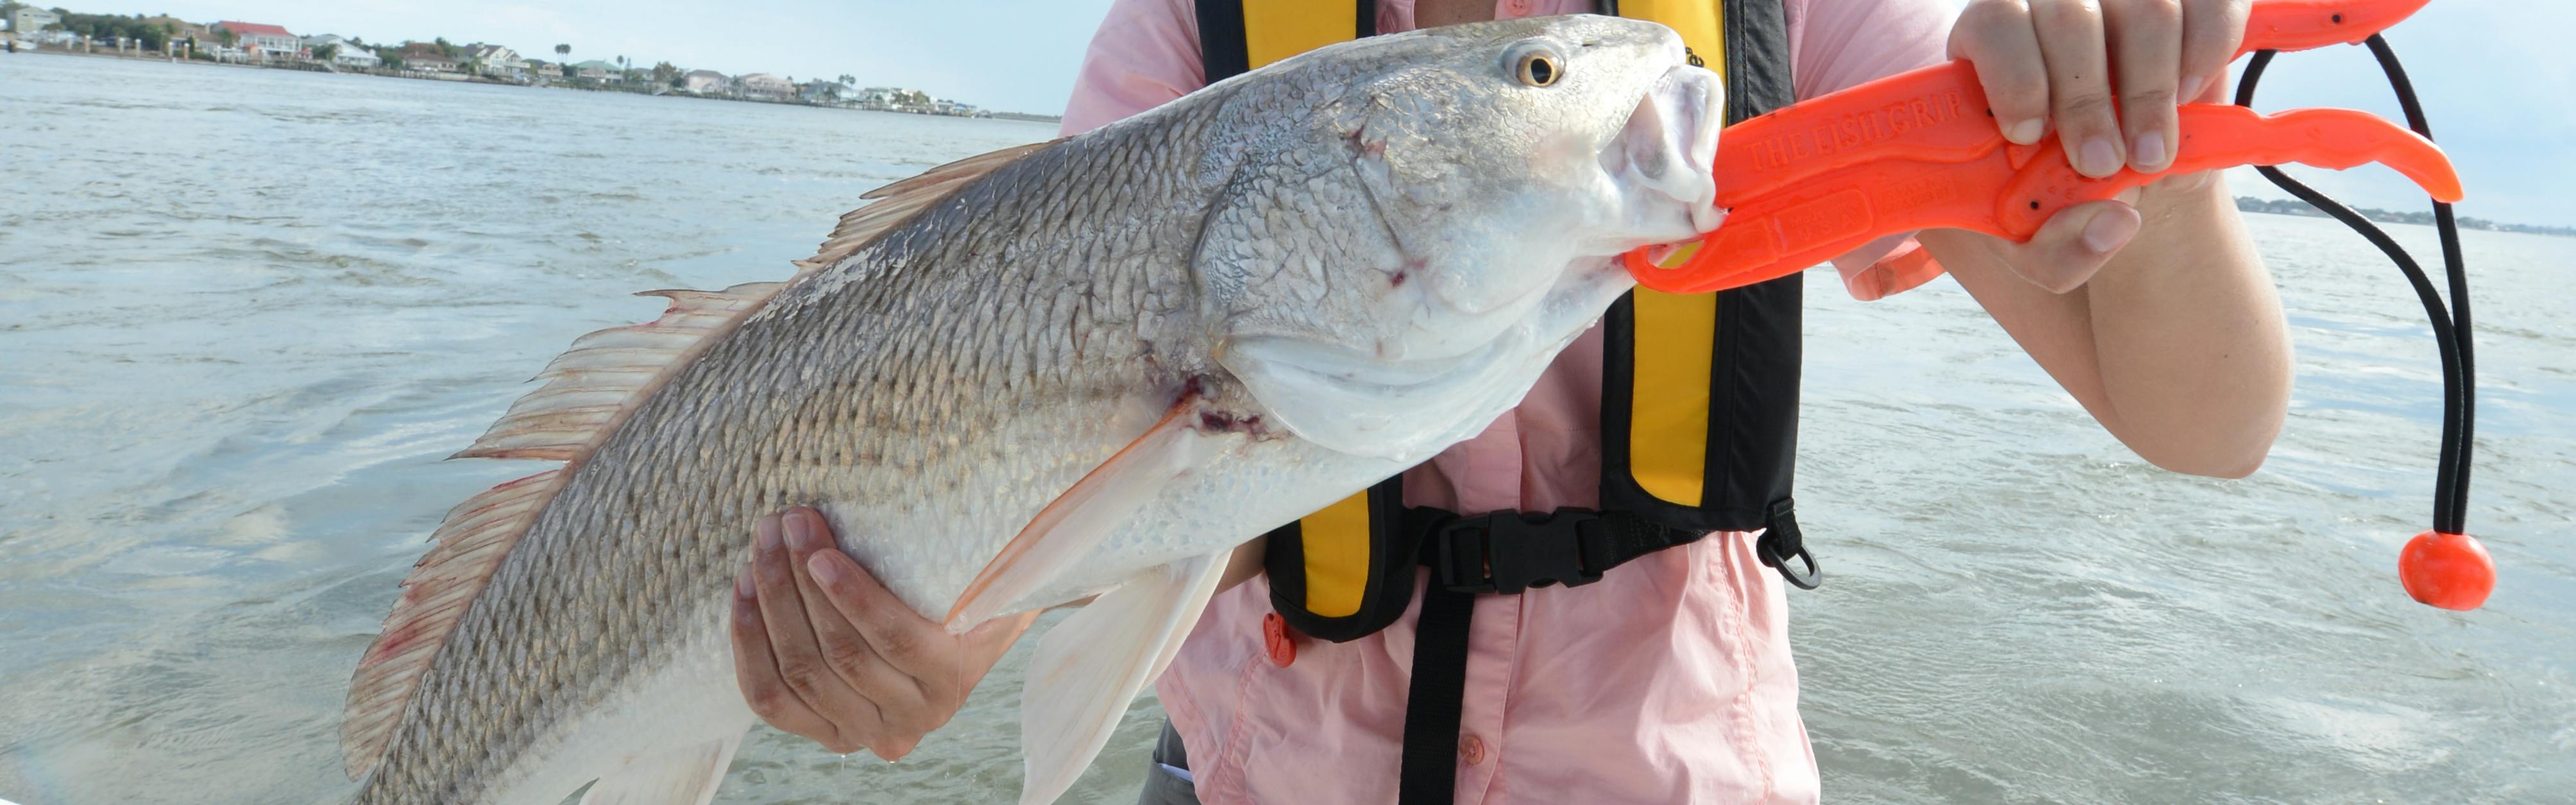 The Best Fly Fishing For Redfish Tips You Can't Miss